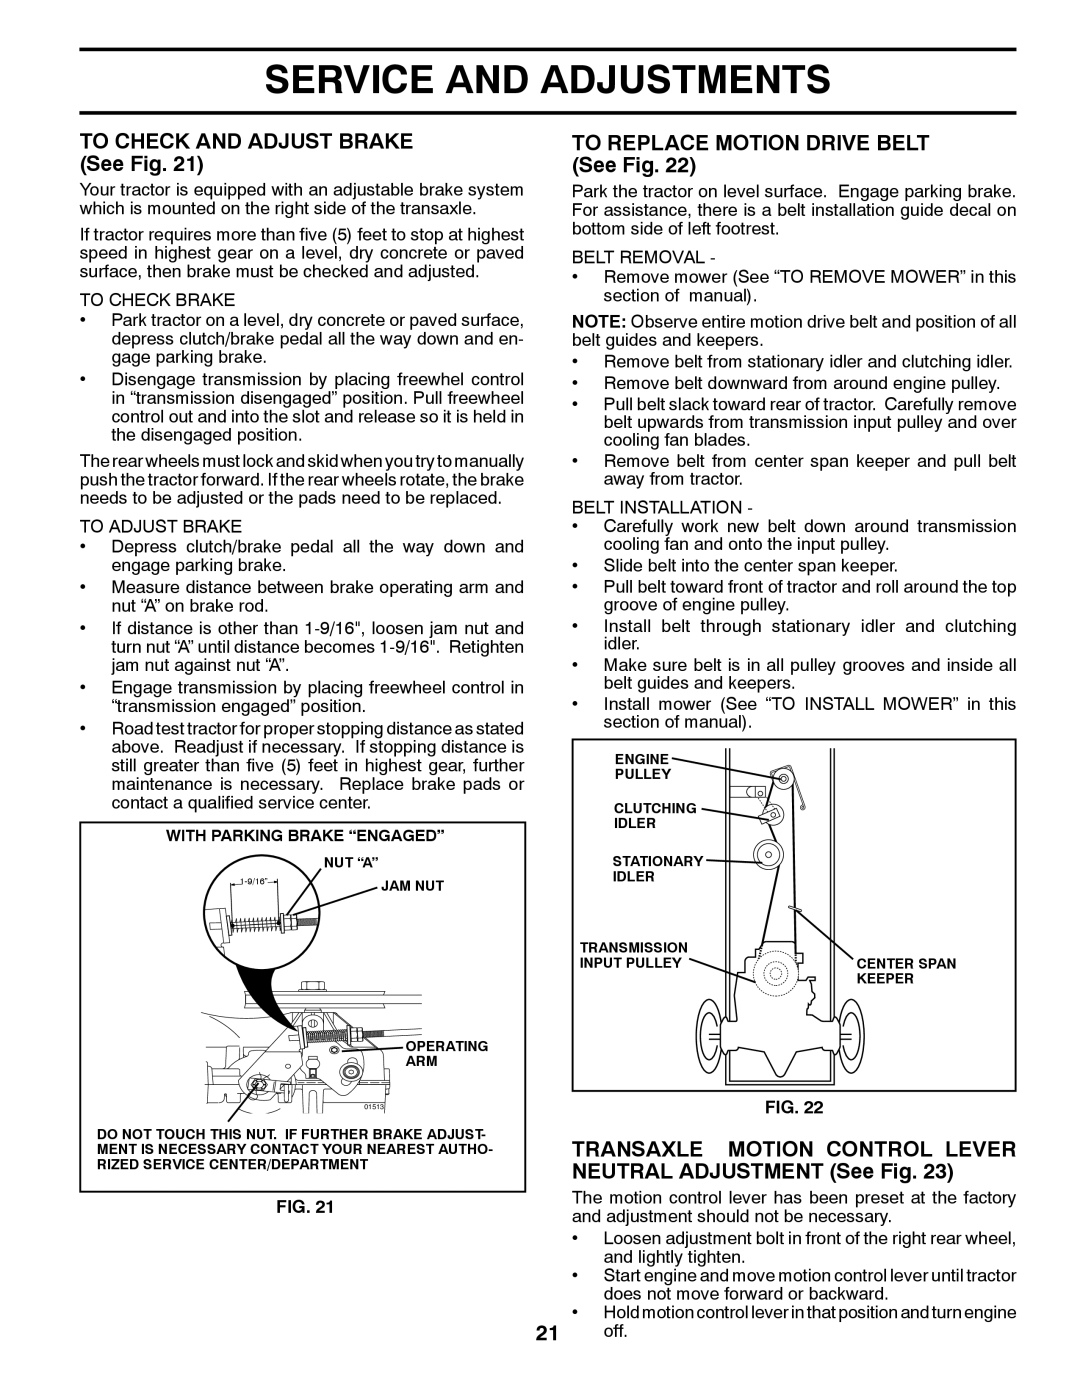 Poulan 418791 manual TO CHECK AND ADJUST BRAKE See Fig, TO REPLACE MOTION DRIVE BELT See Fig, Service And Adjustments 